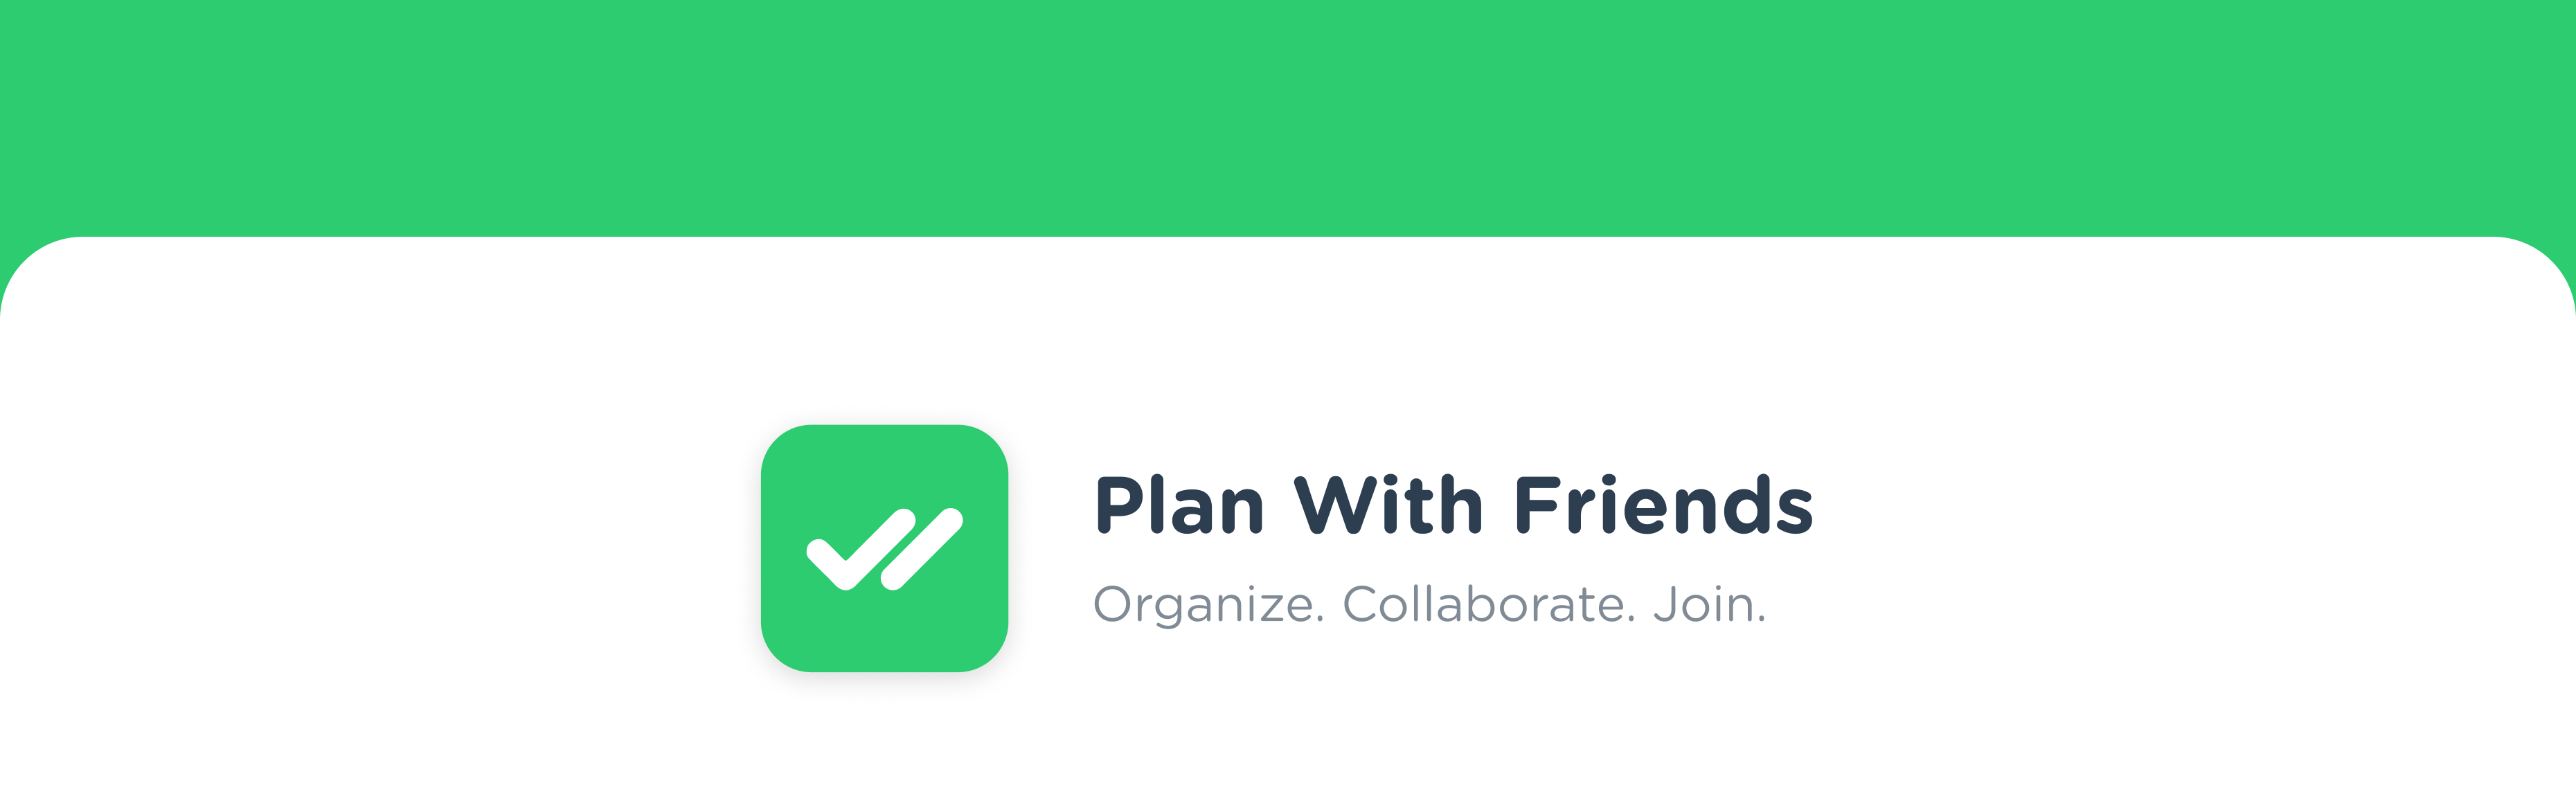 Plan With Friends - Social App